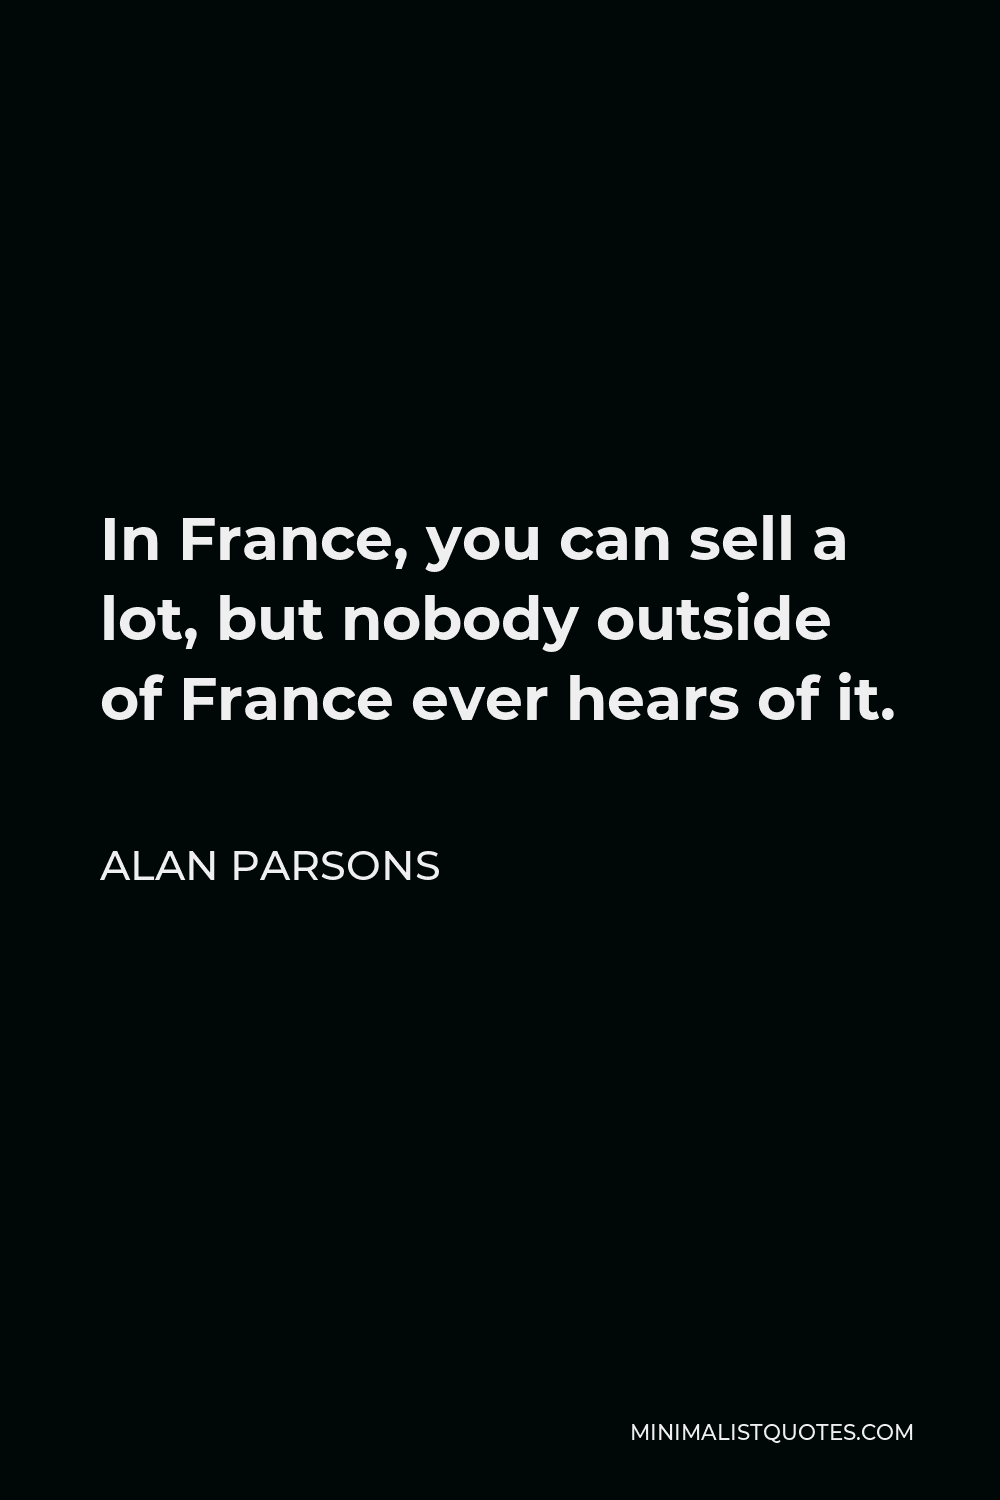 Alan Parsons Quote - In France, you can sell a lot, but nobody outside of France ever hears of it.